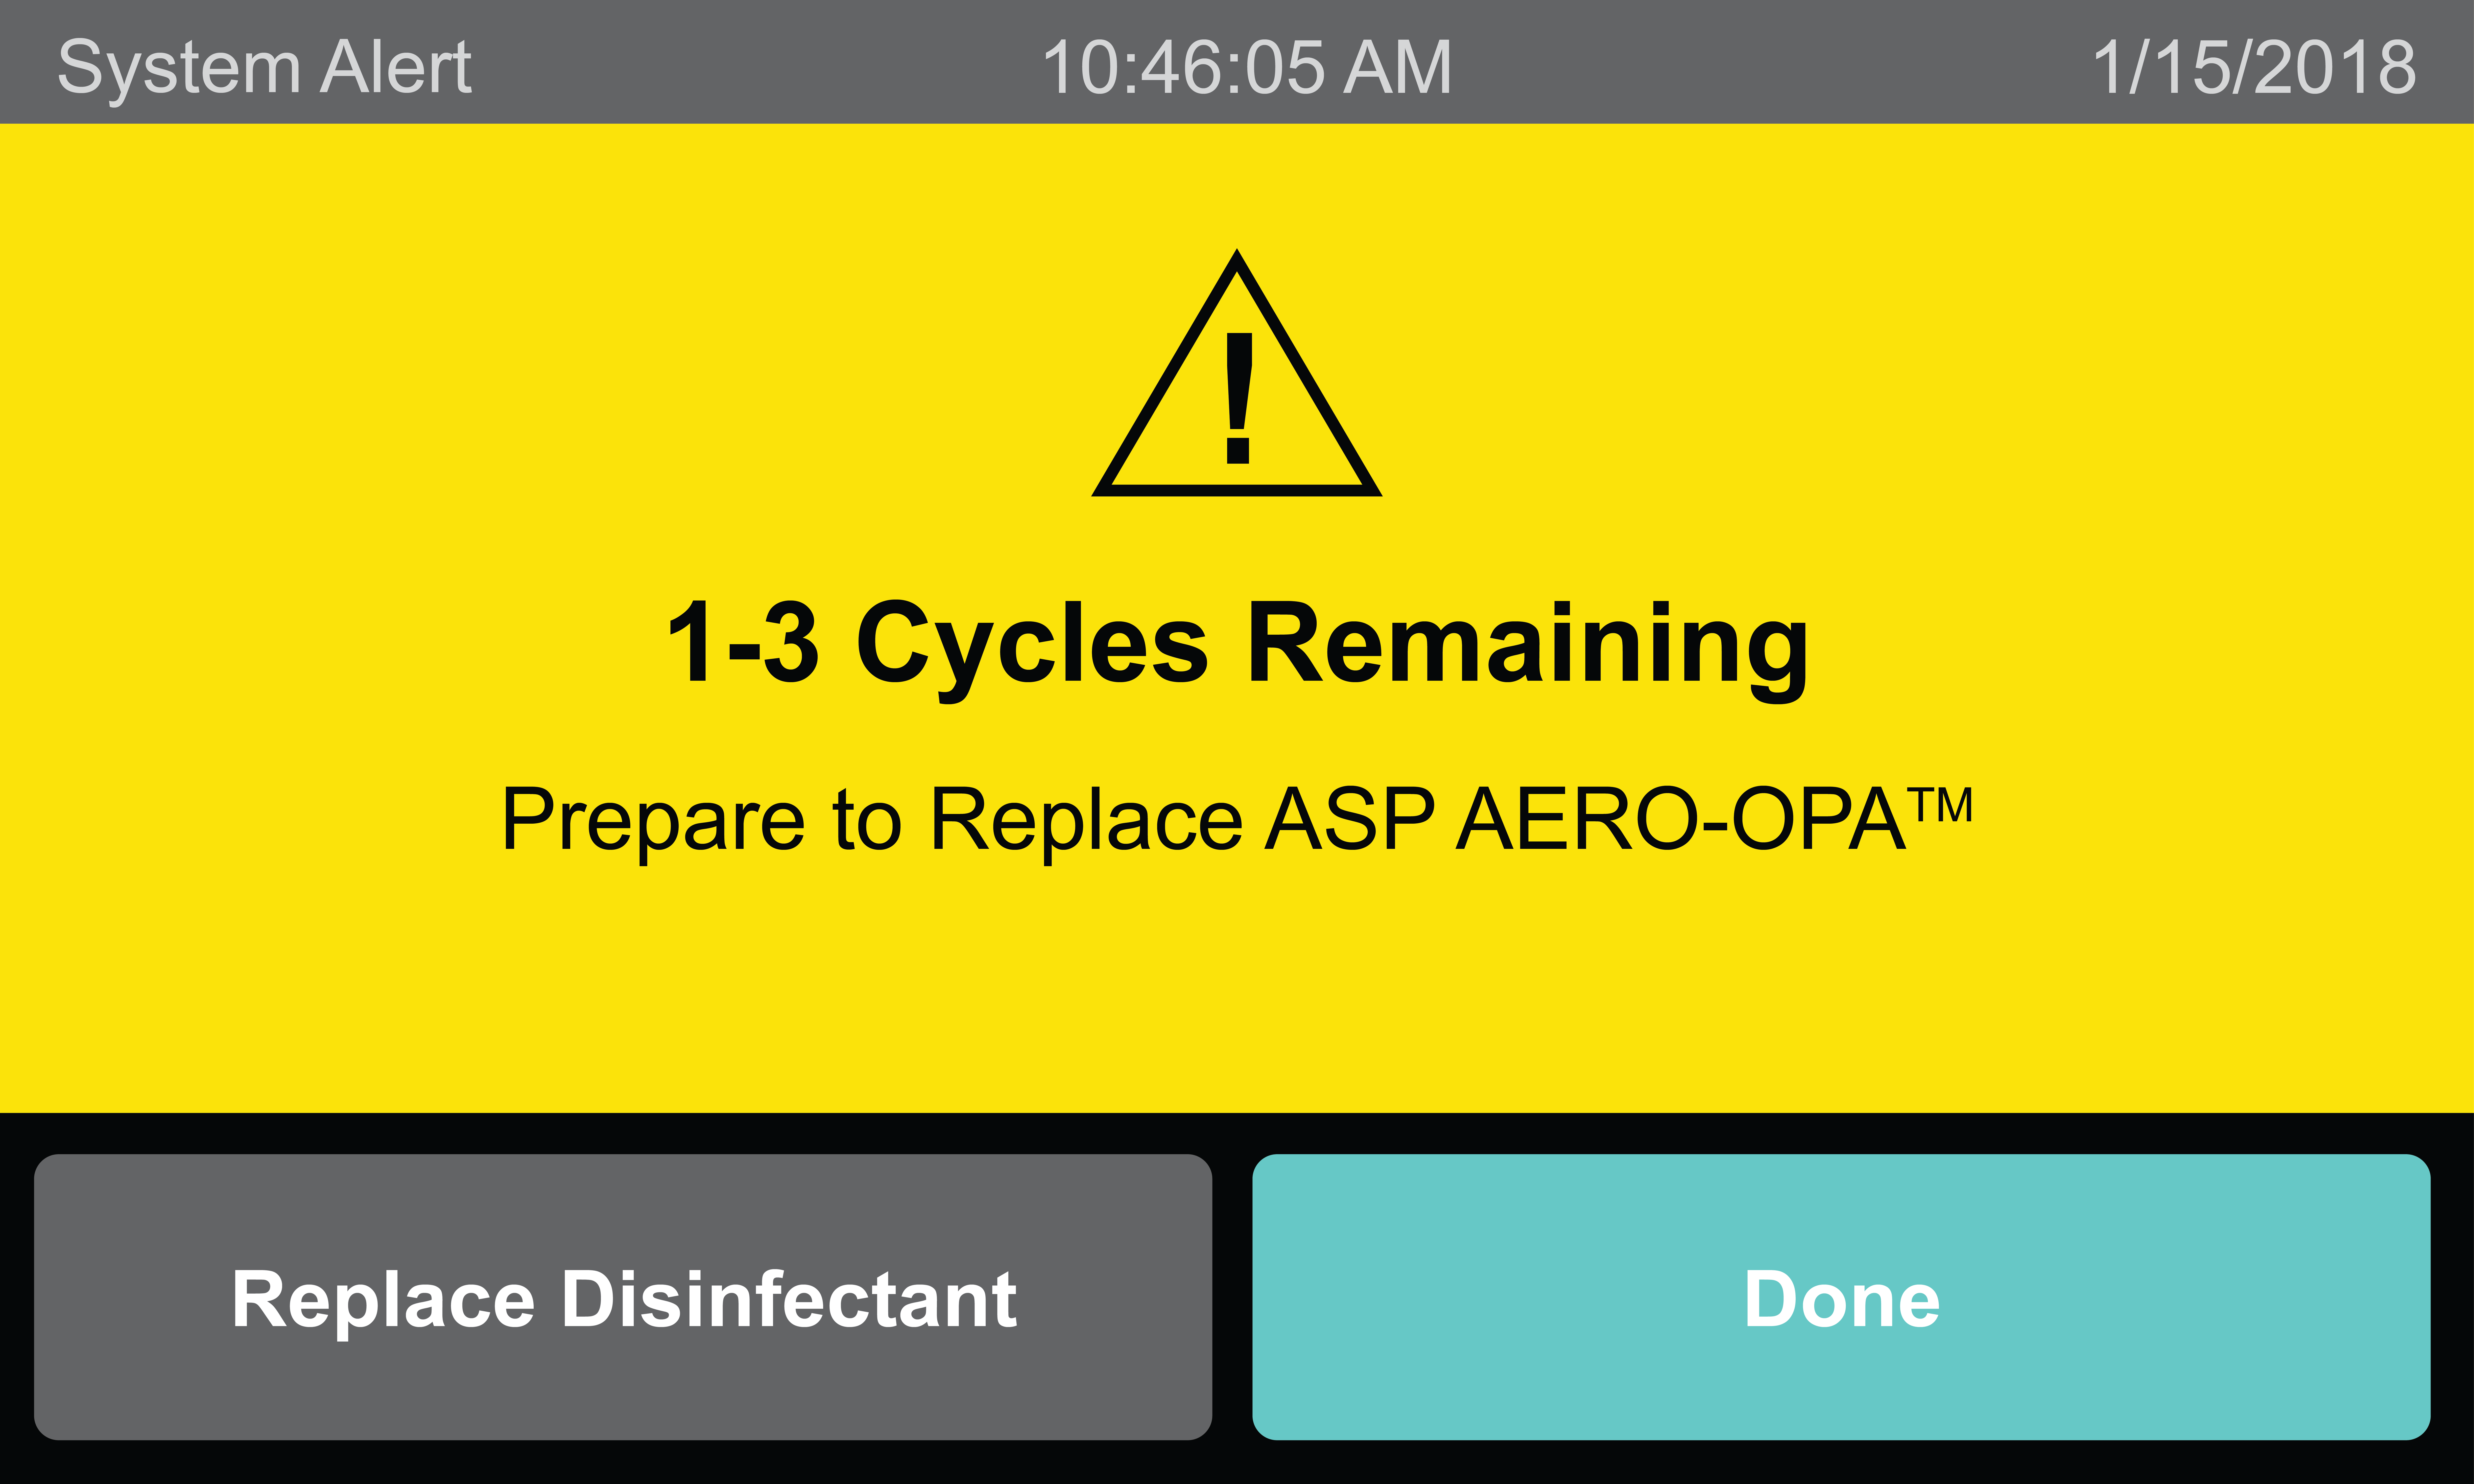 1-3 Cycles Remaining Alert